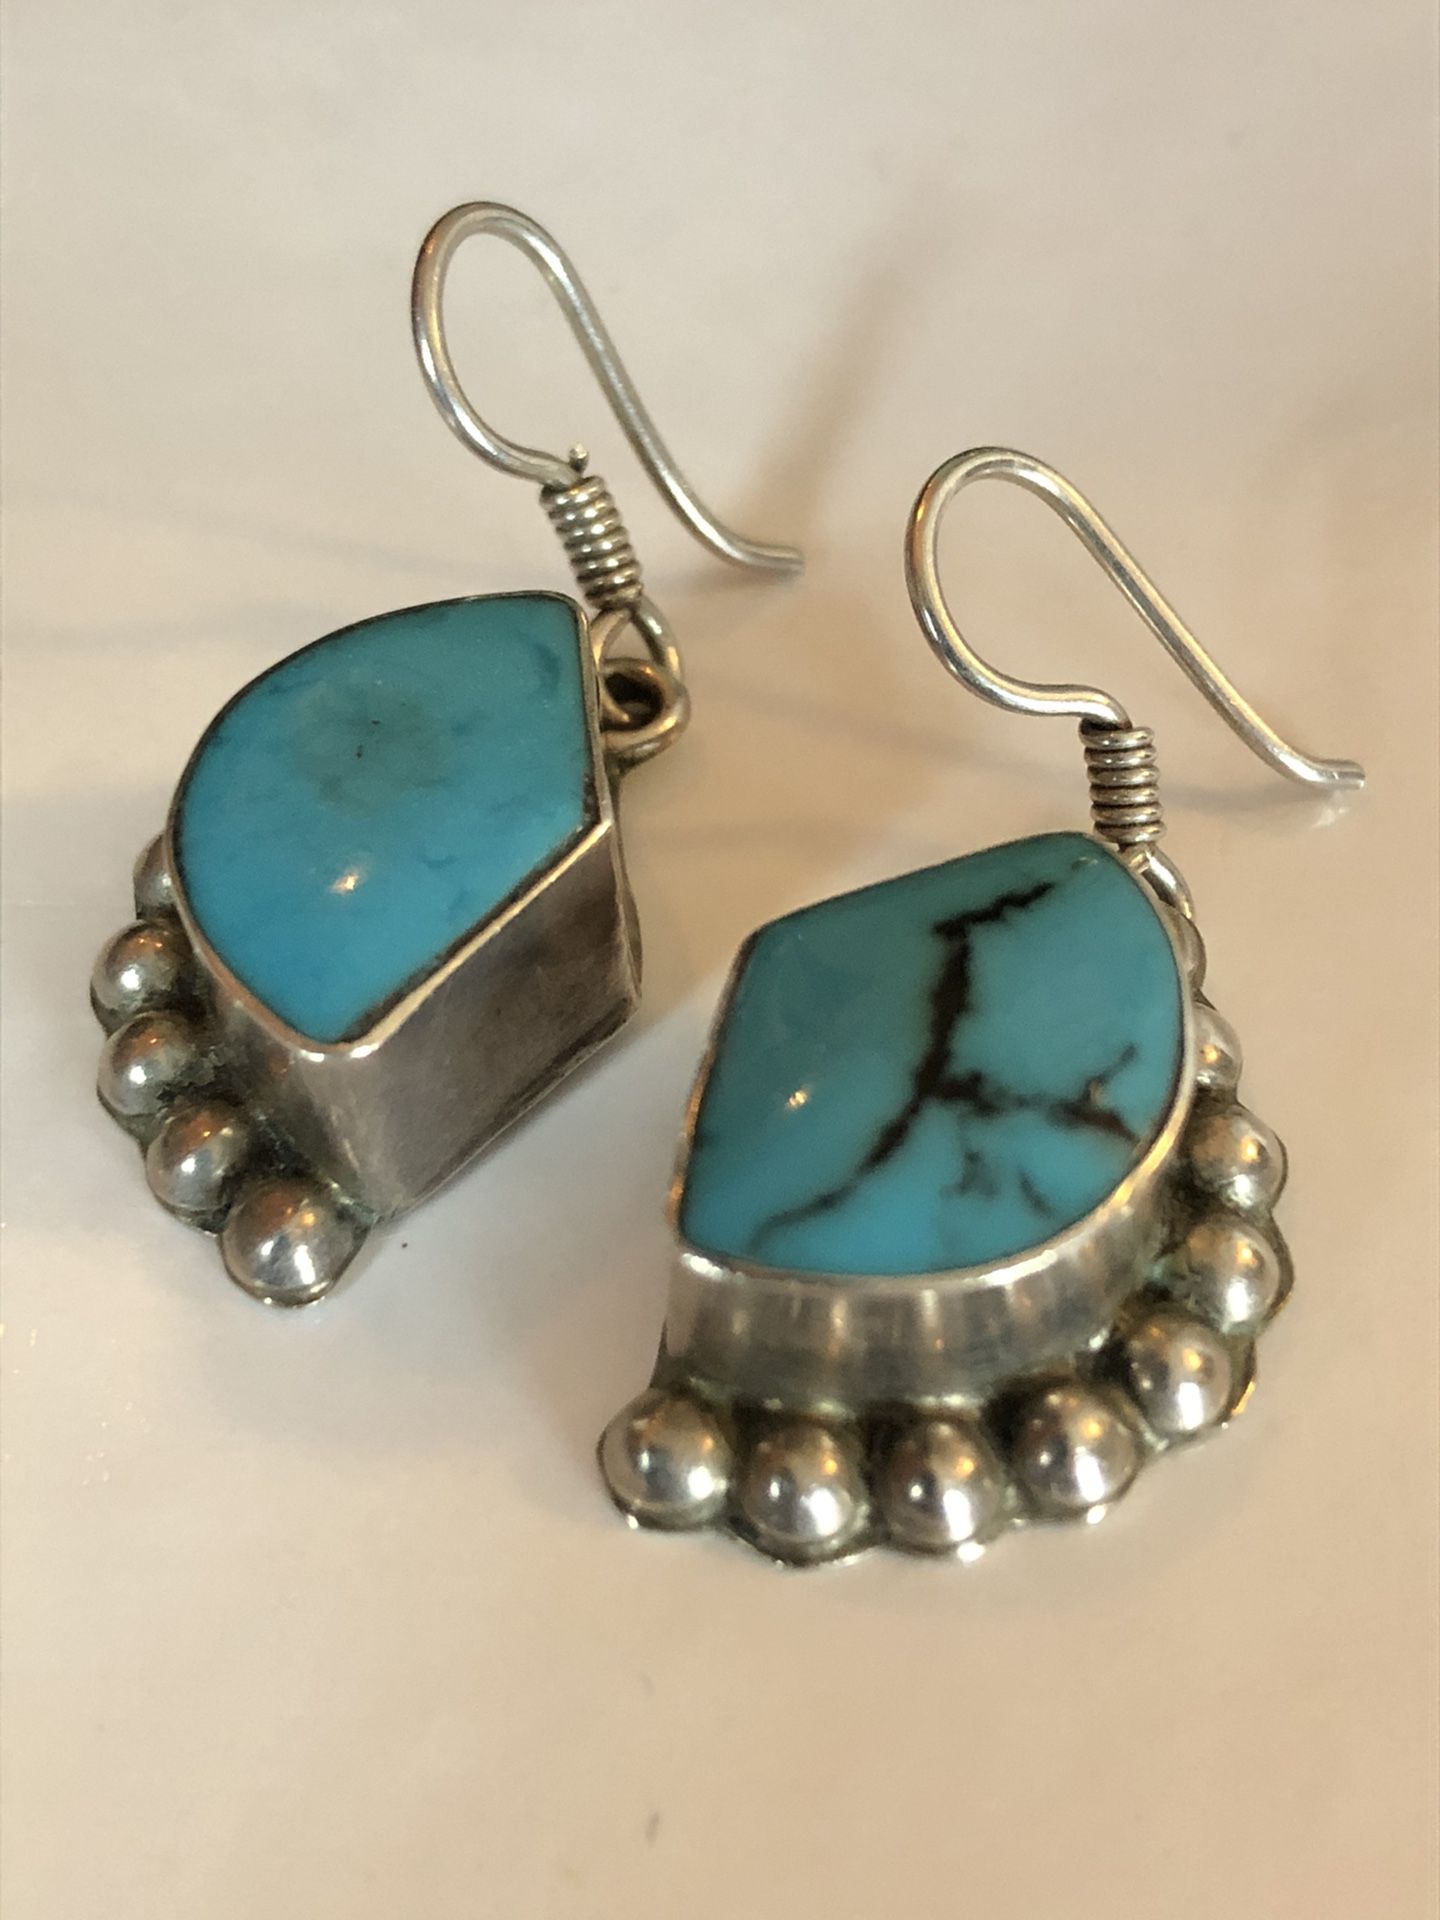 Vintage silver and turquoise earrings